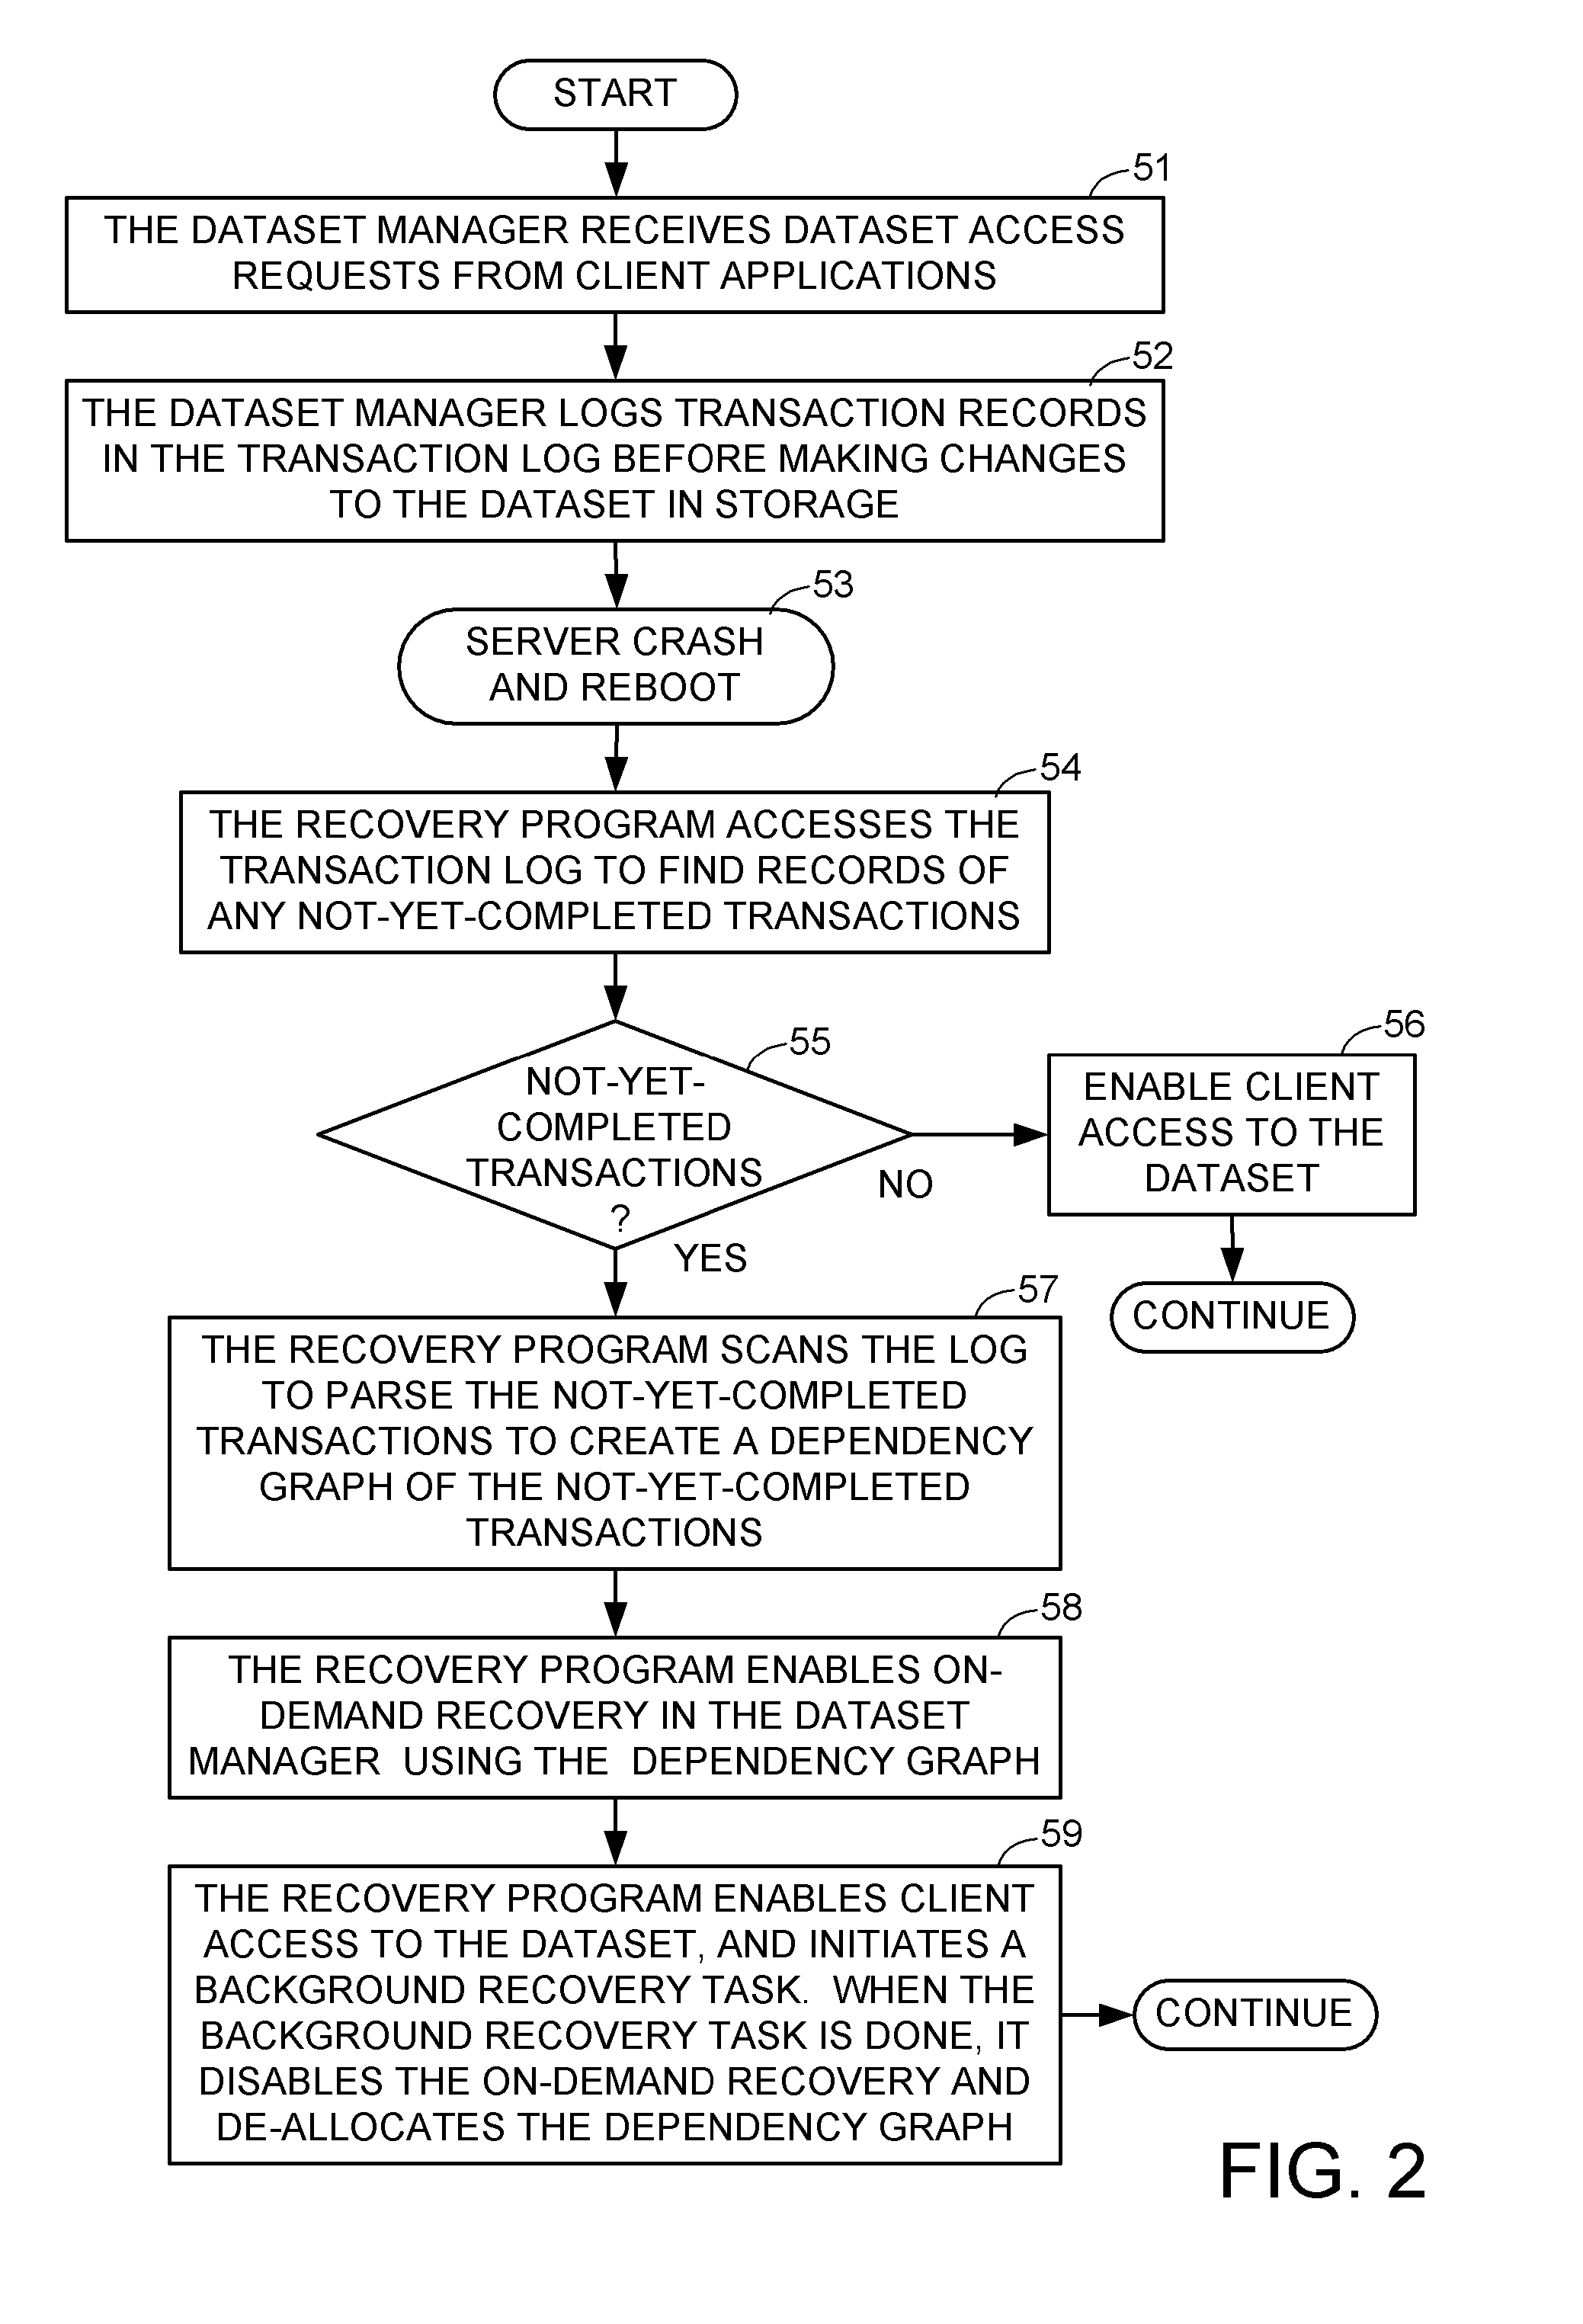 Multi-threaded in-memory processing of a transaction log for concurrent access to data during log replay